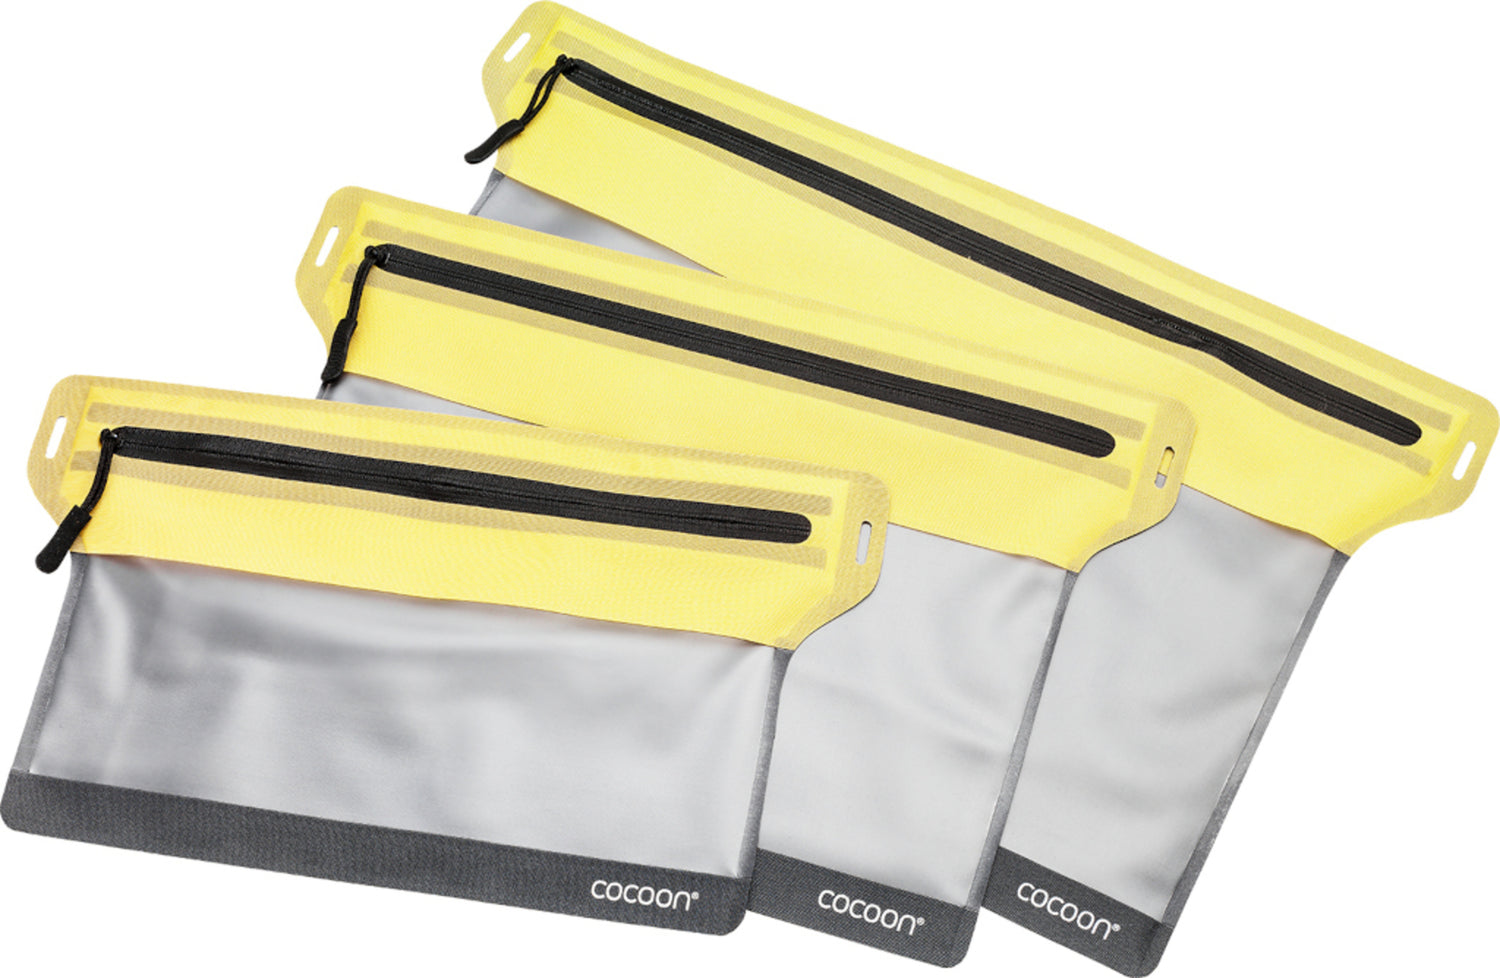 Cocoon Zippered Flat Document Bags Size M grey/yellow